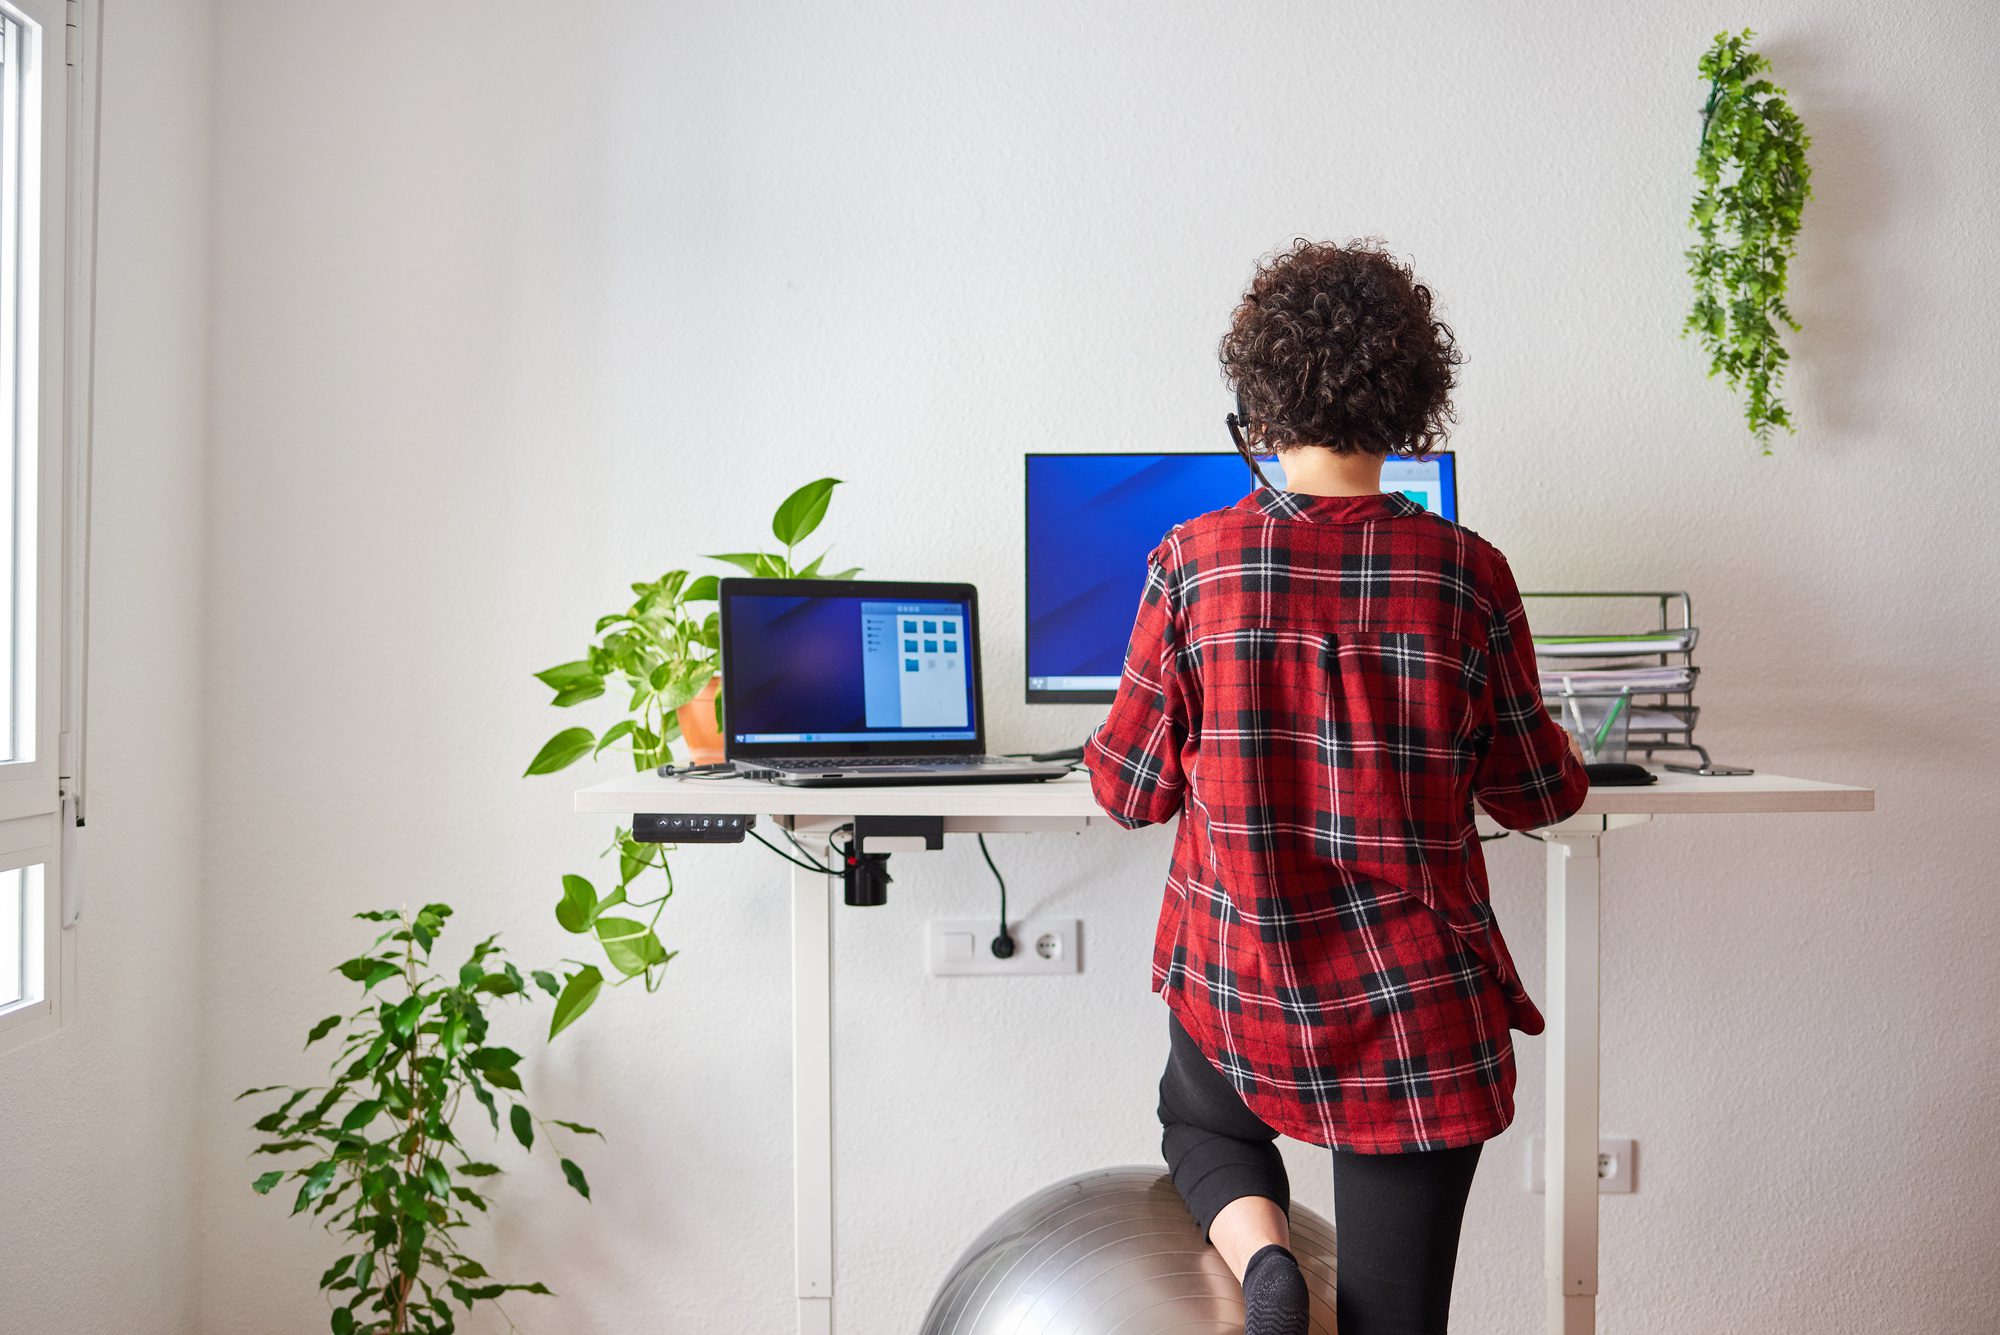 A woman integrating ergonomics in her elevated home office, standing on an exercise ball while working on her computer.